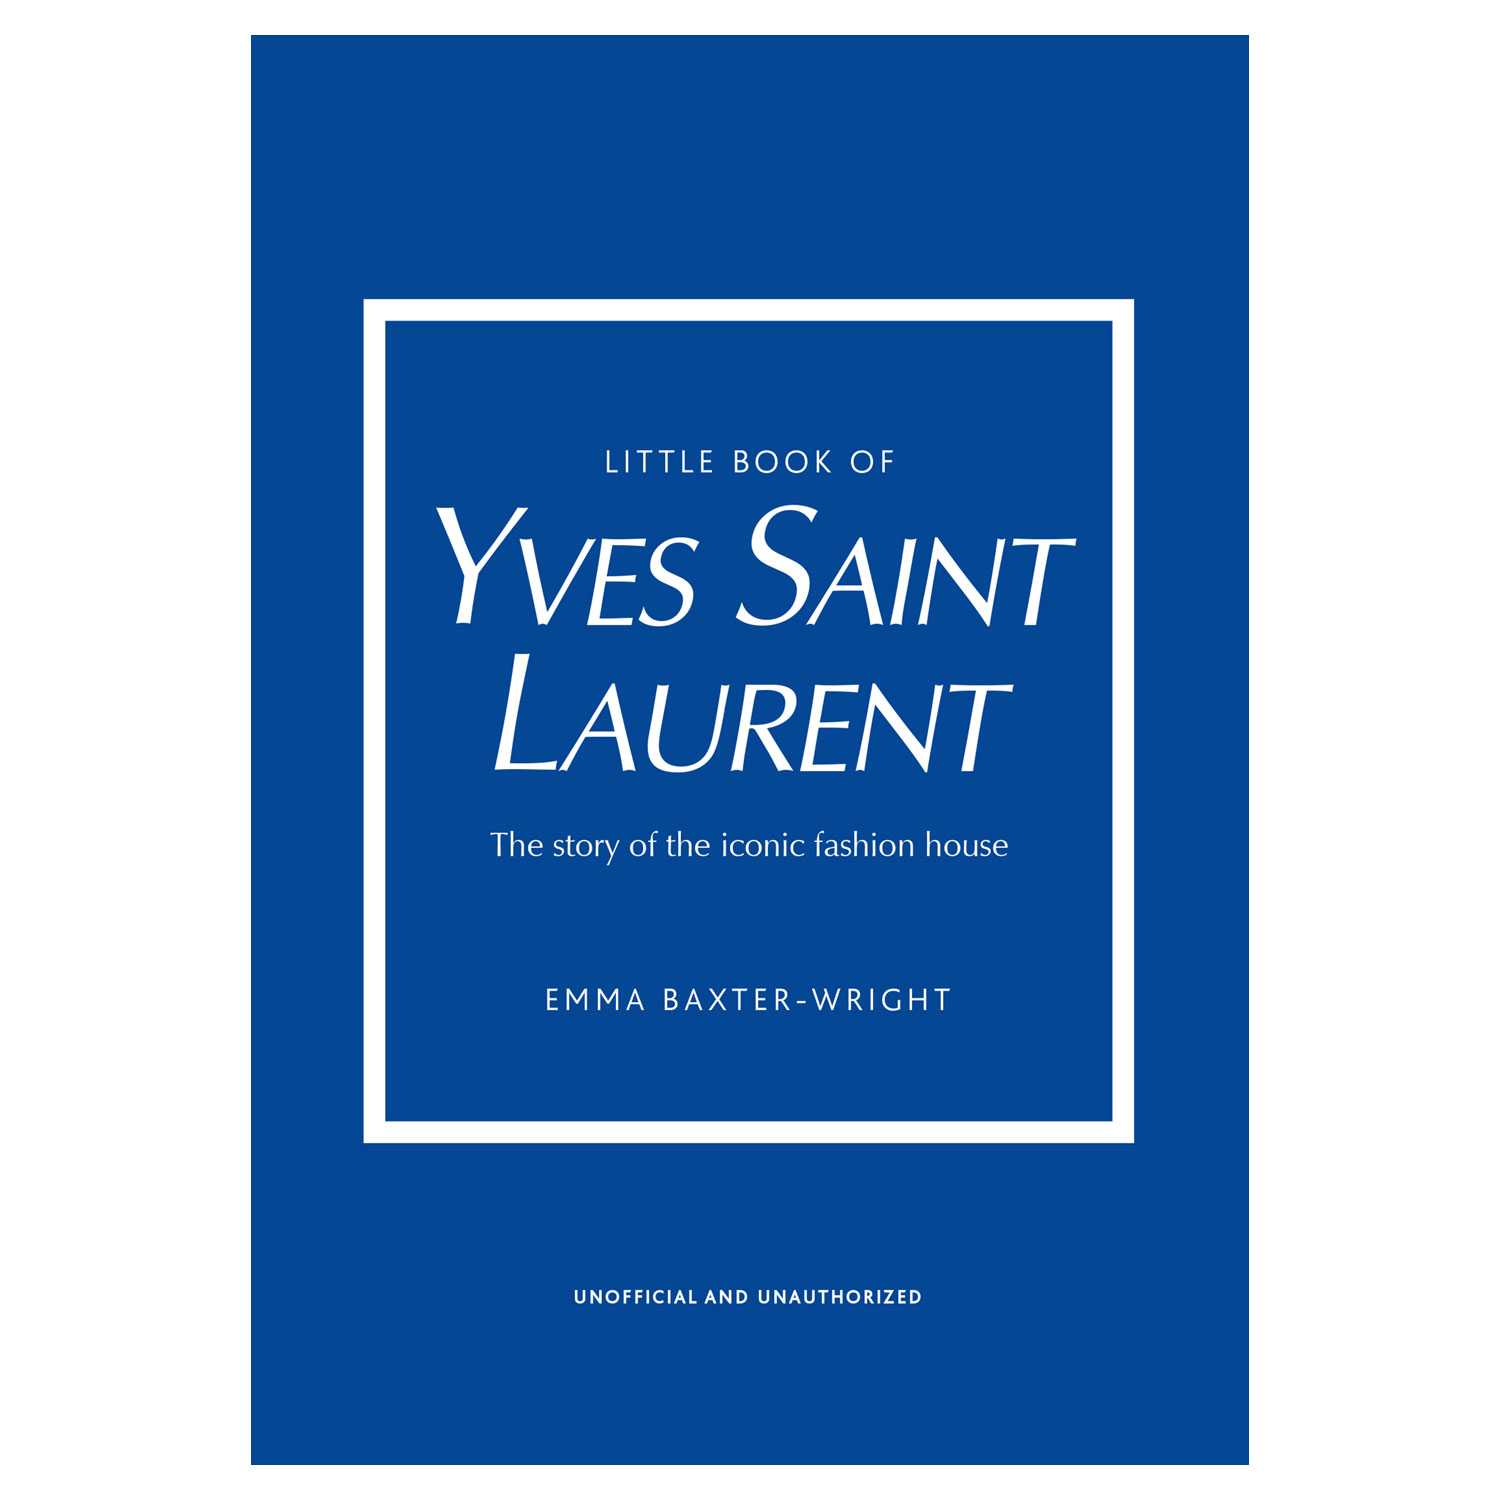 Little Book of Yves Saint Laurent: The Story of the Iconic Fashion House [Book]